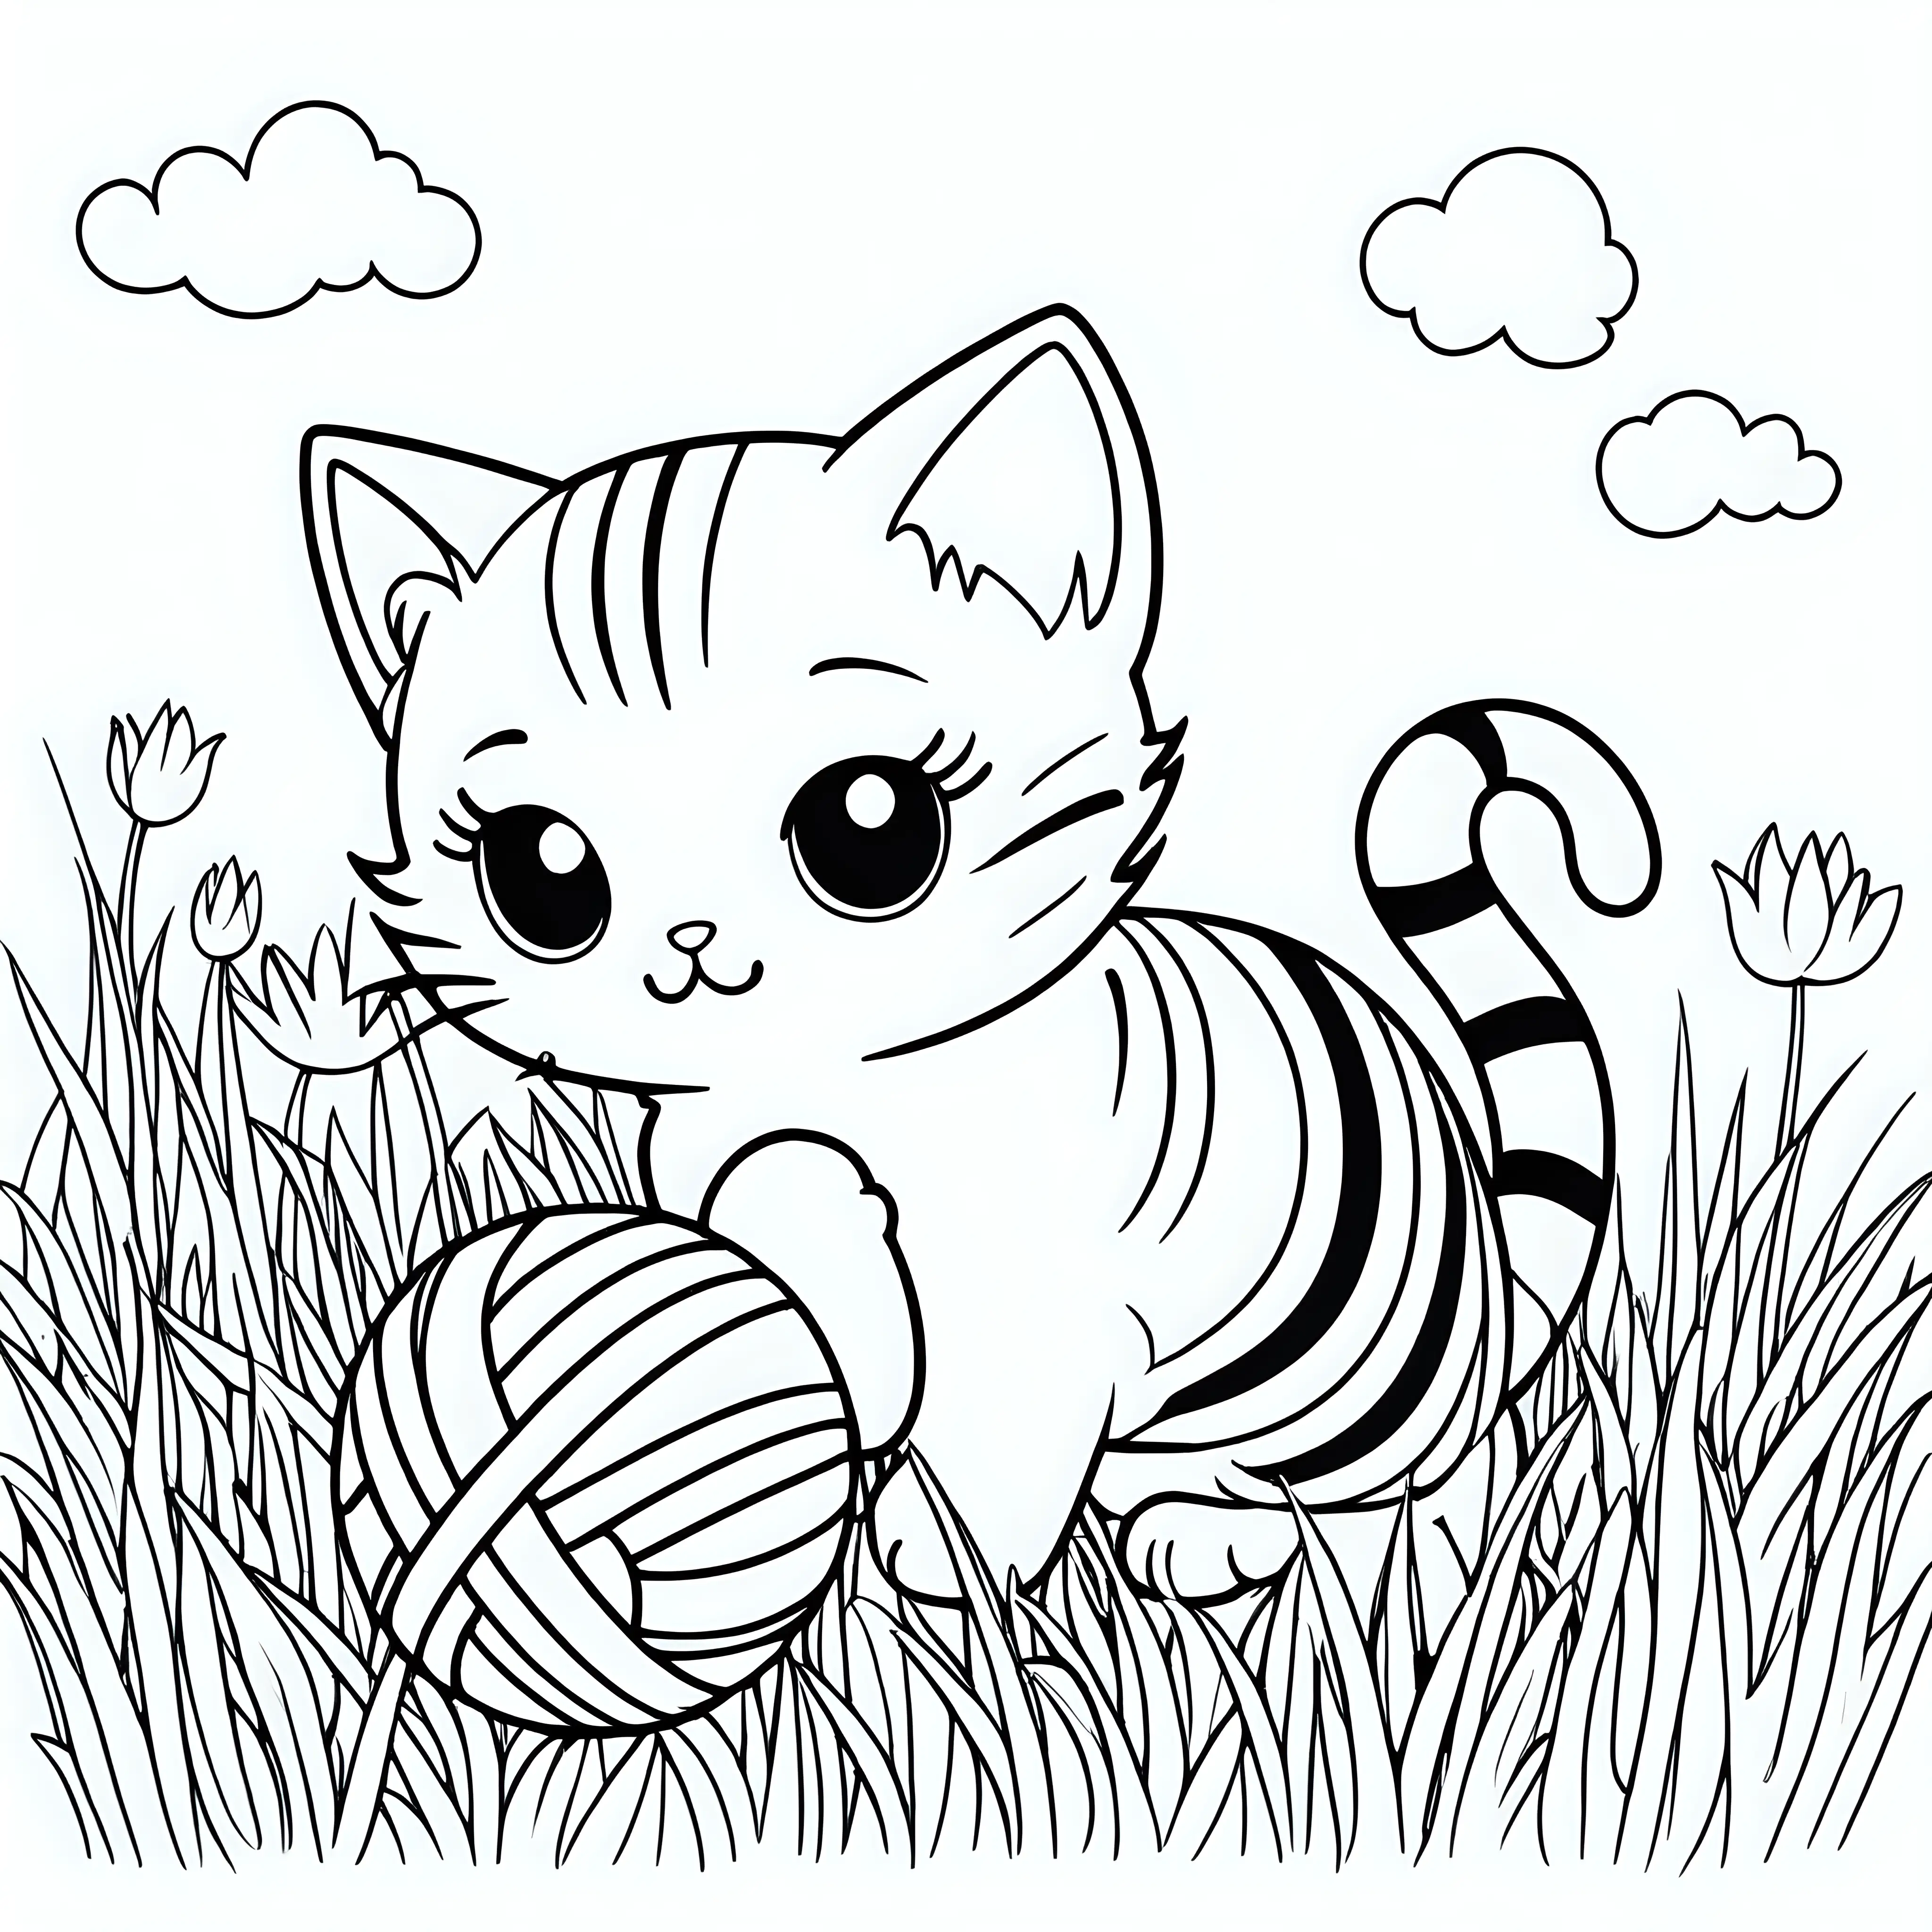 Adorable Kawaii Cat Coloring Page with Striped Ball in Grass Field